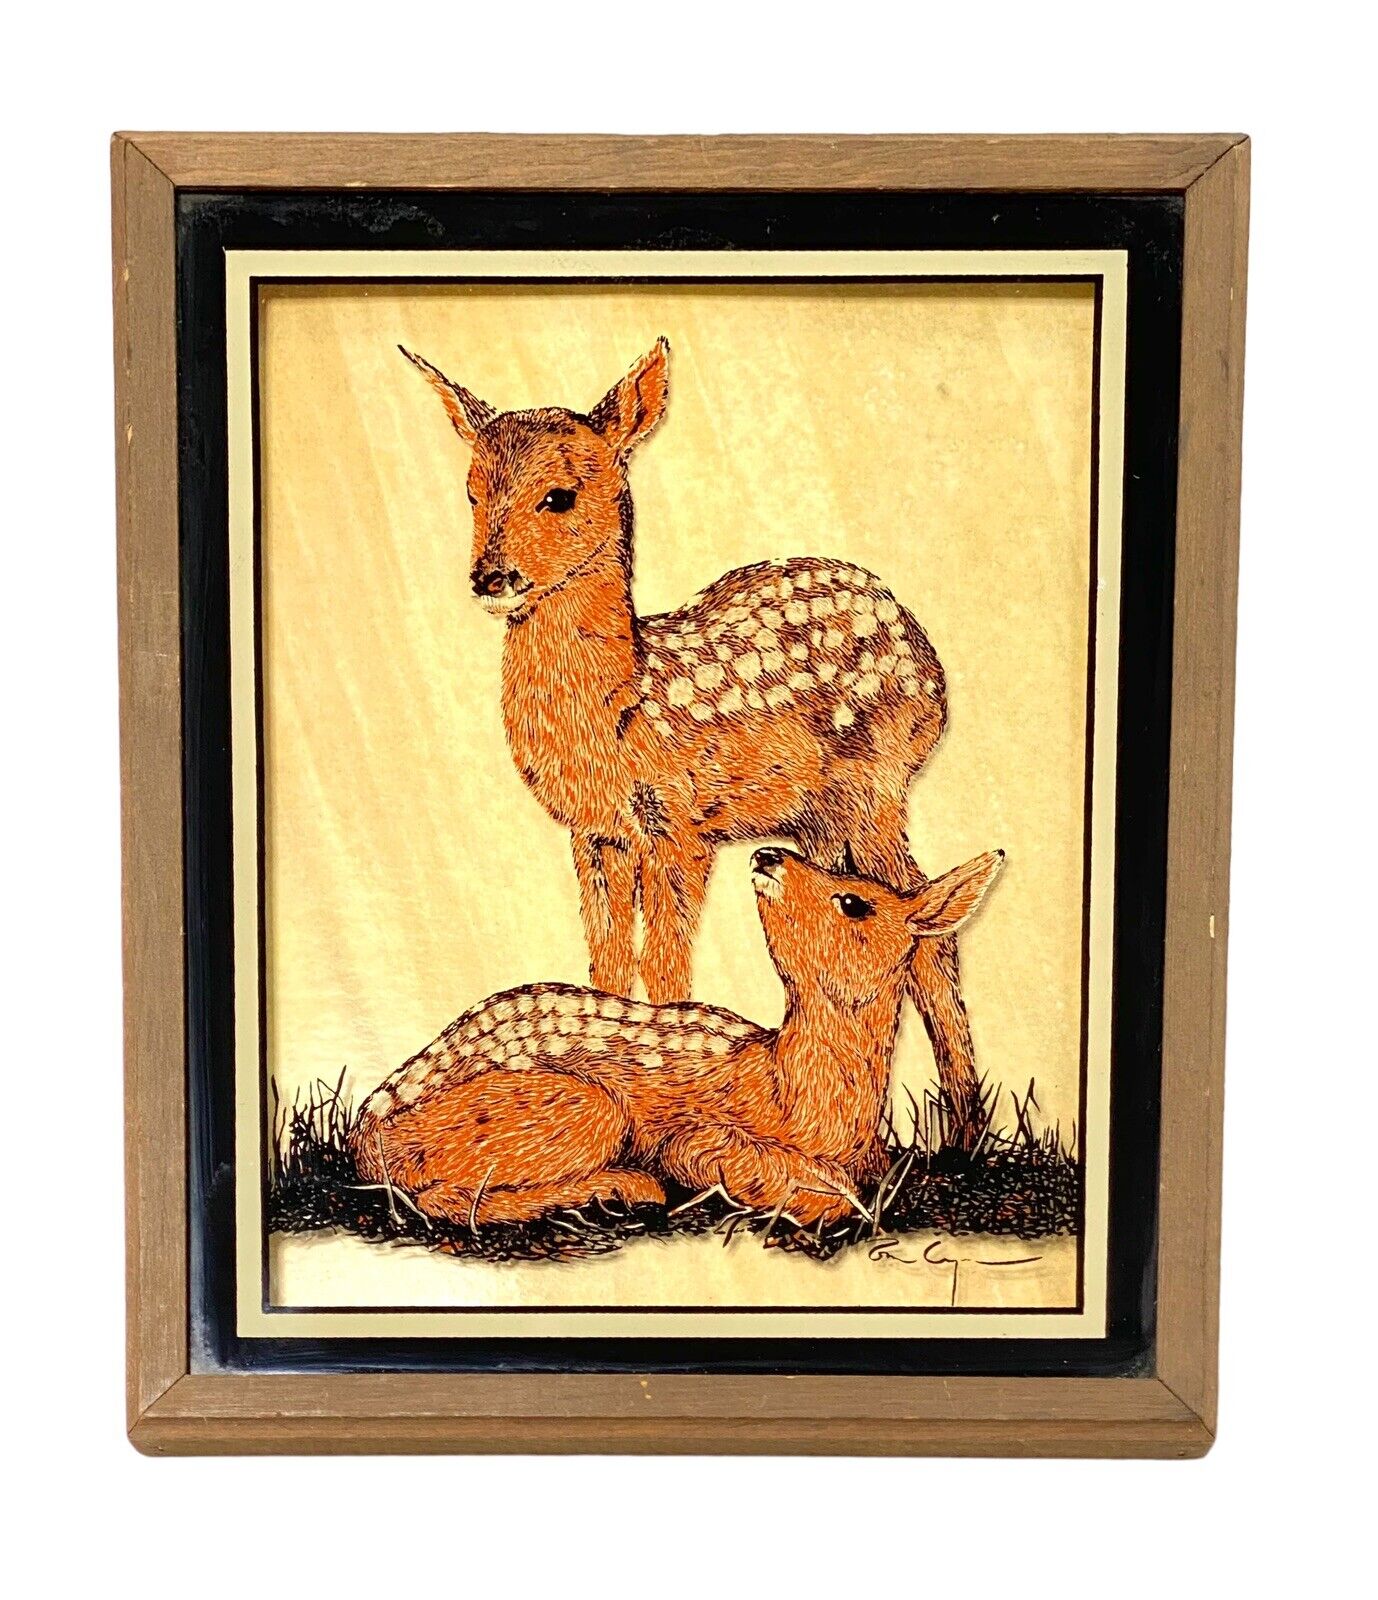 Vintage Retro Framed Printed Reverse Painting On Glass Deer Fawns 